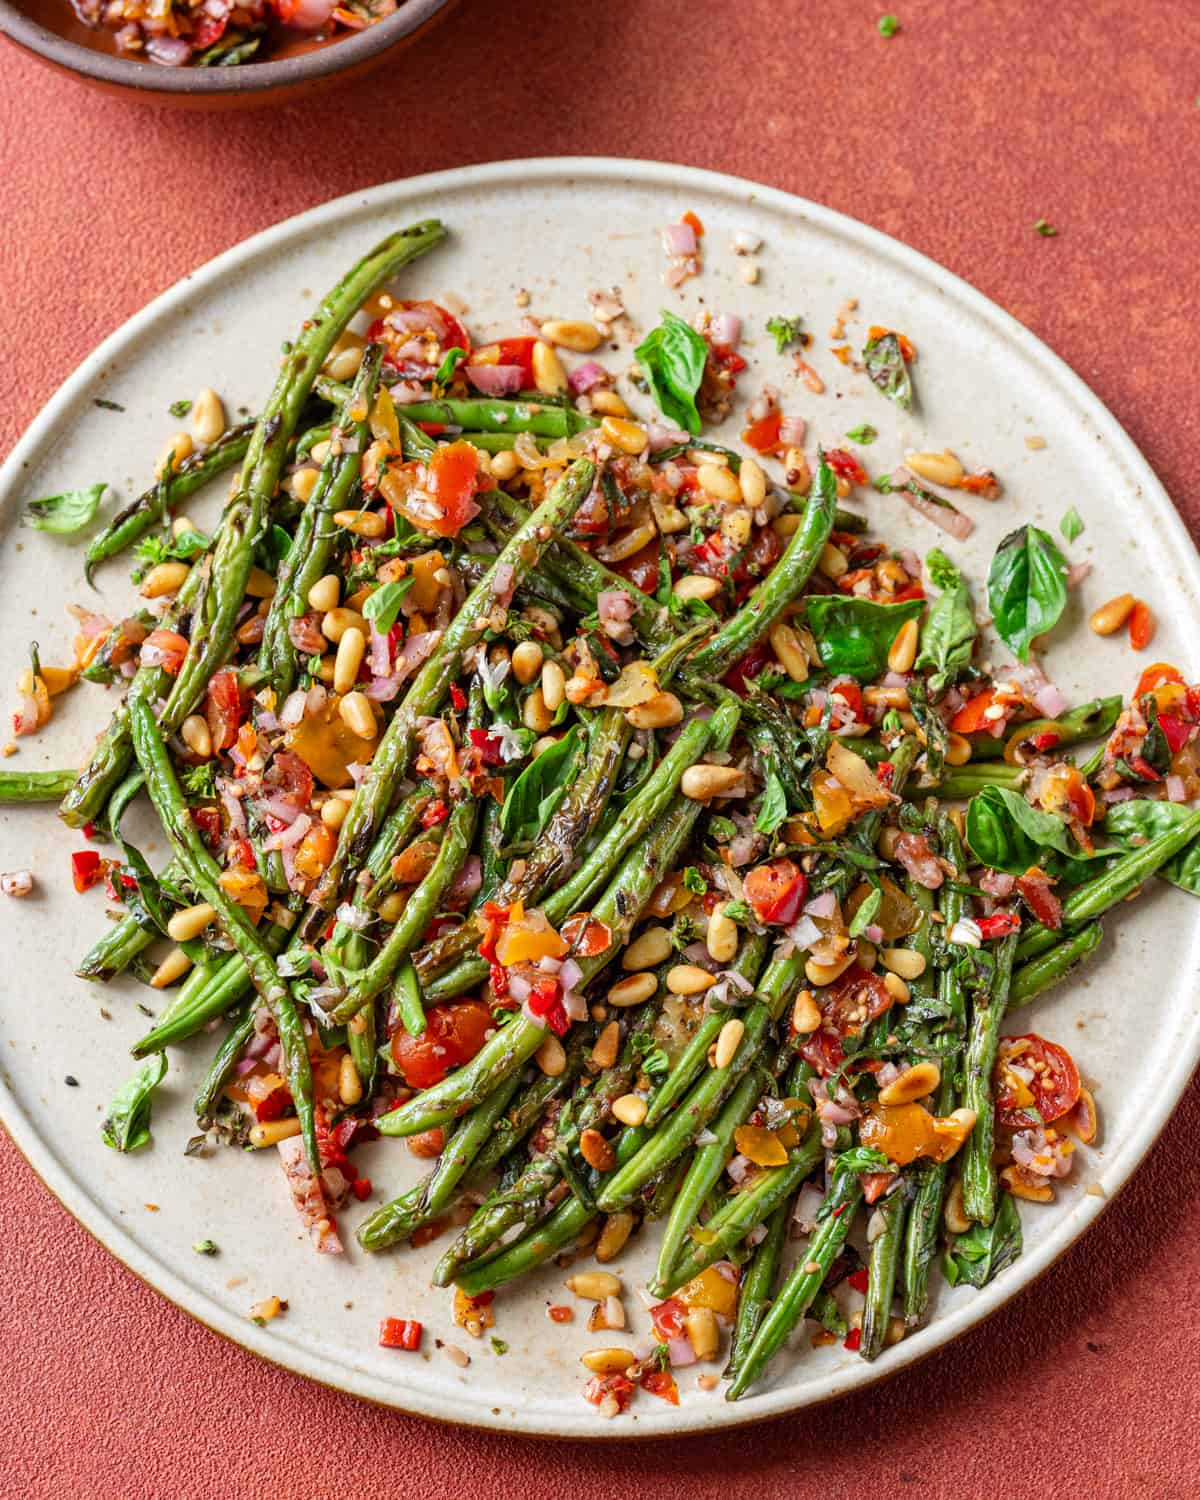 Overhead view of plate of charred green beans on a red table.